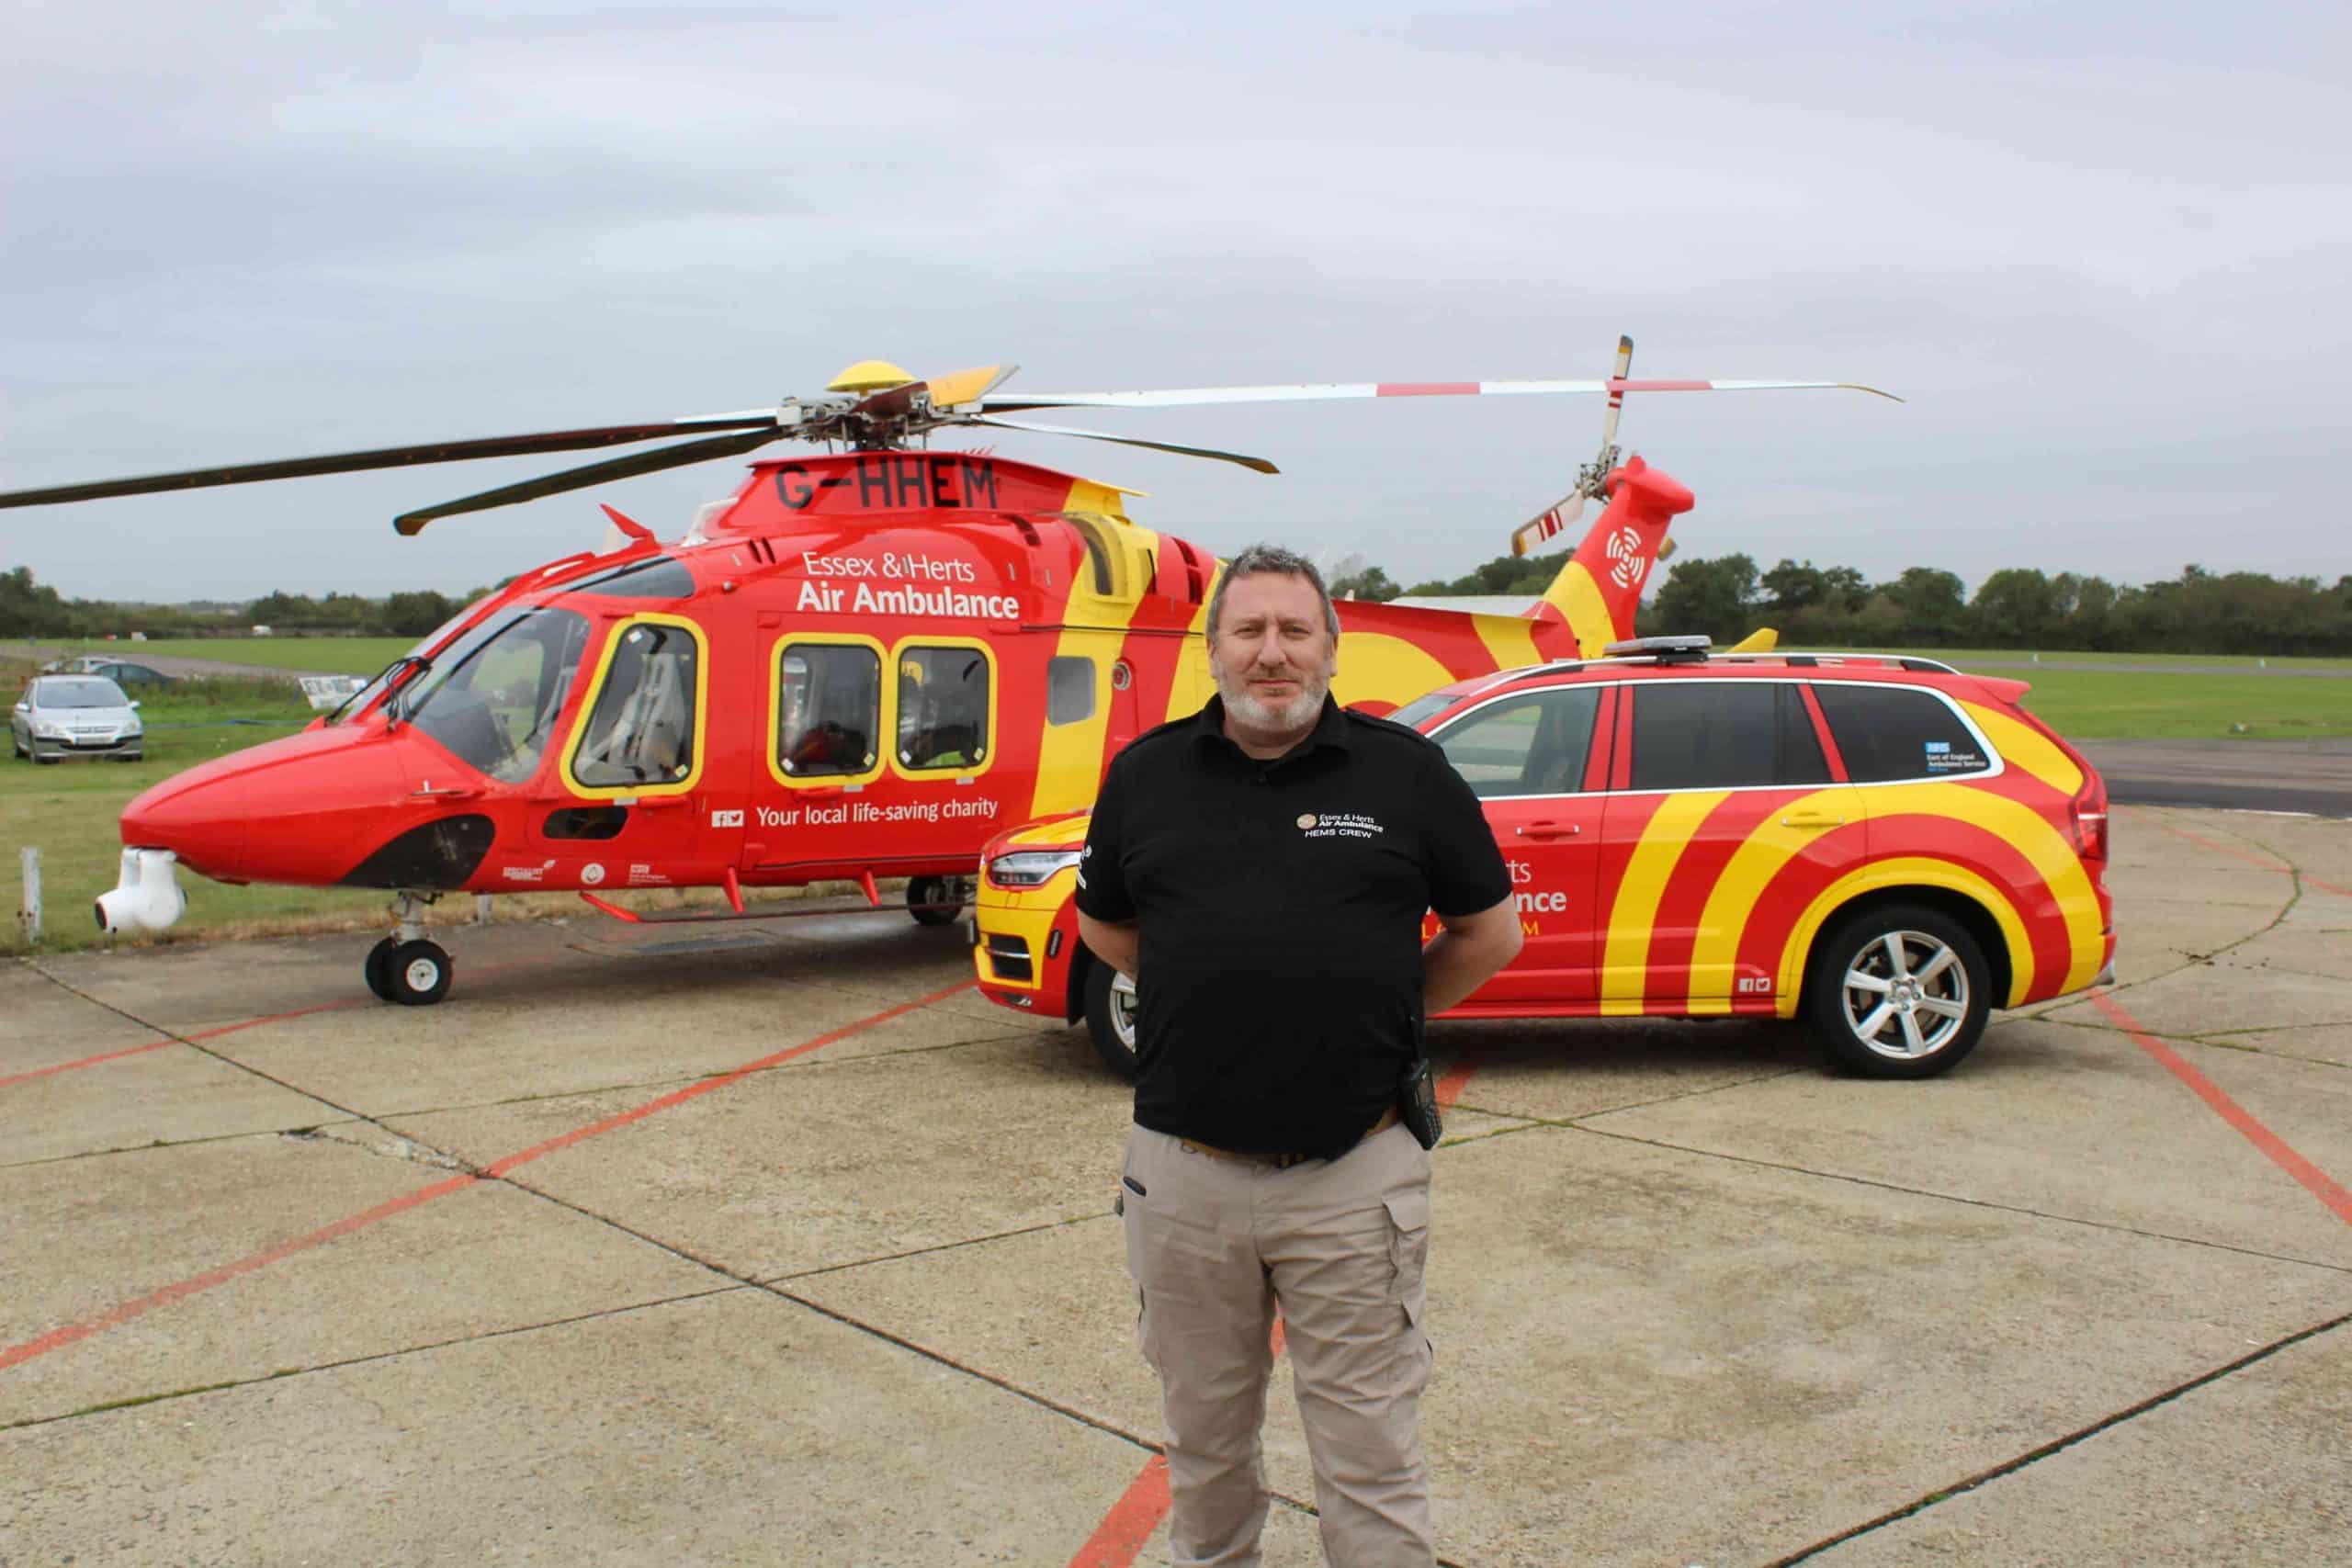 Historic first for Essex & Herts Air Ambulance as 24/7 service begins